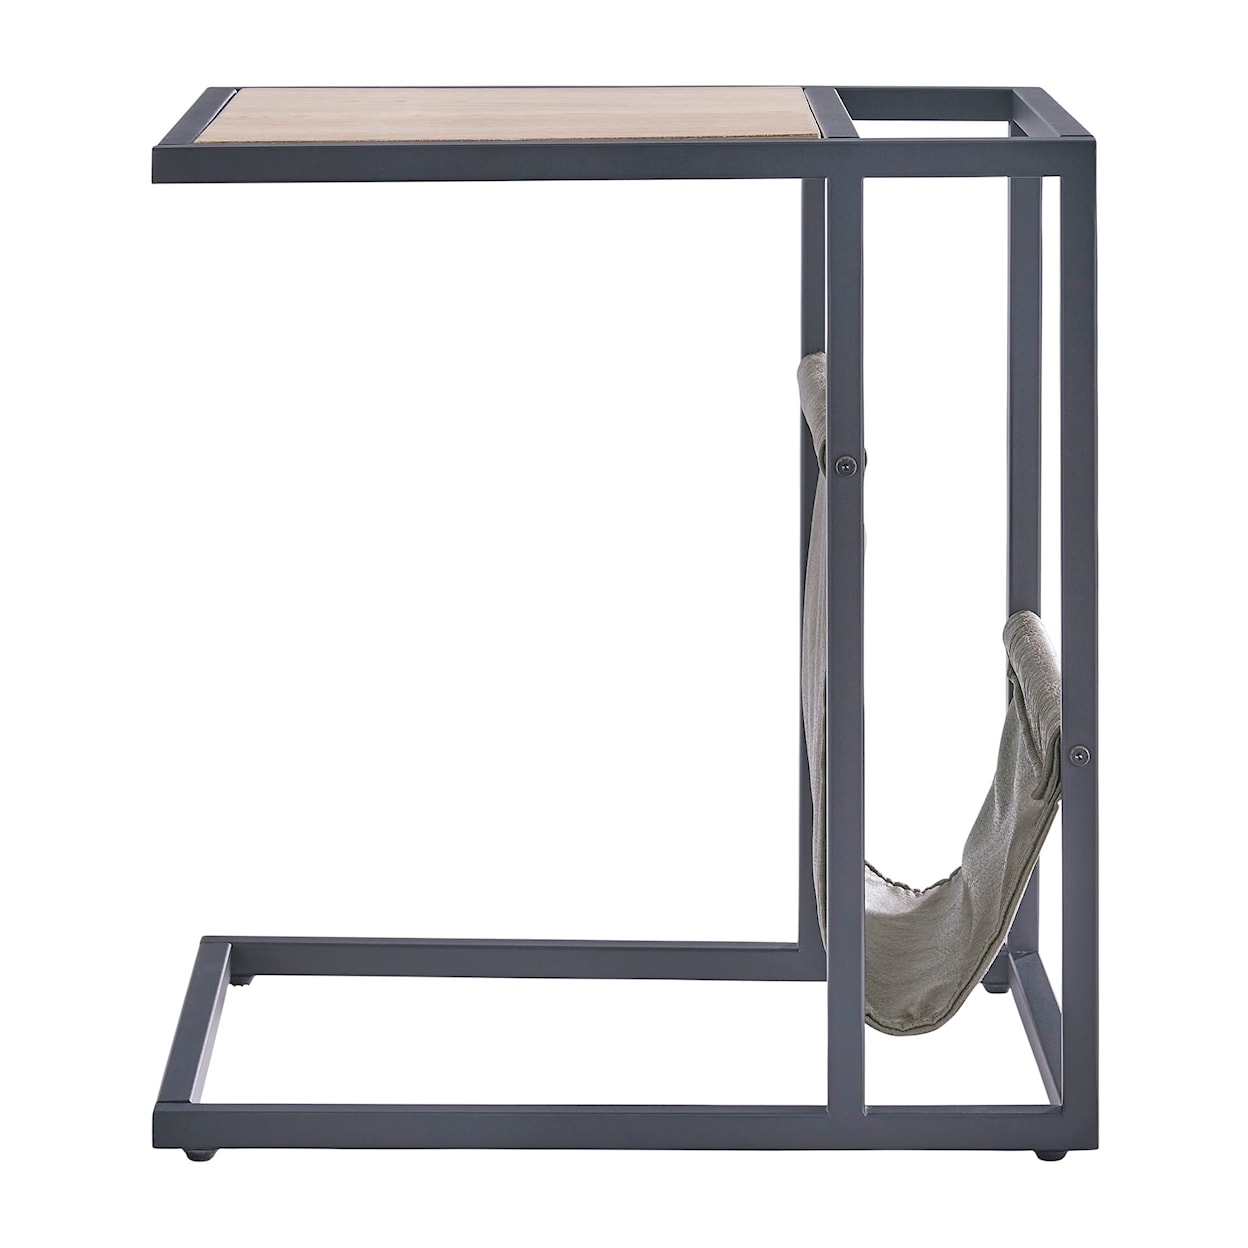 Signature Design by Ashley Freslowe Chairside End Table